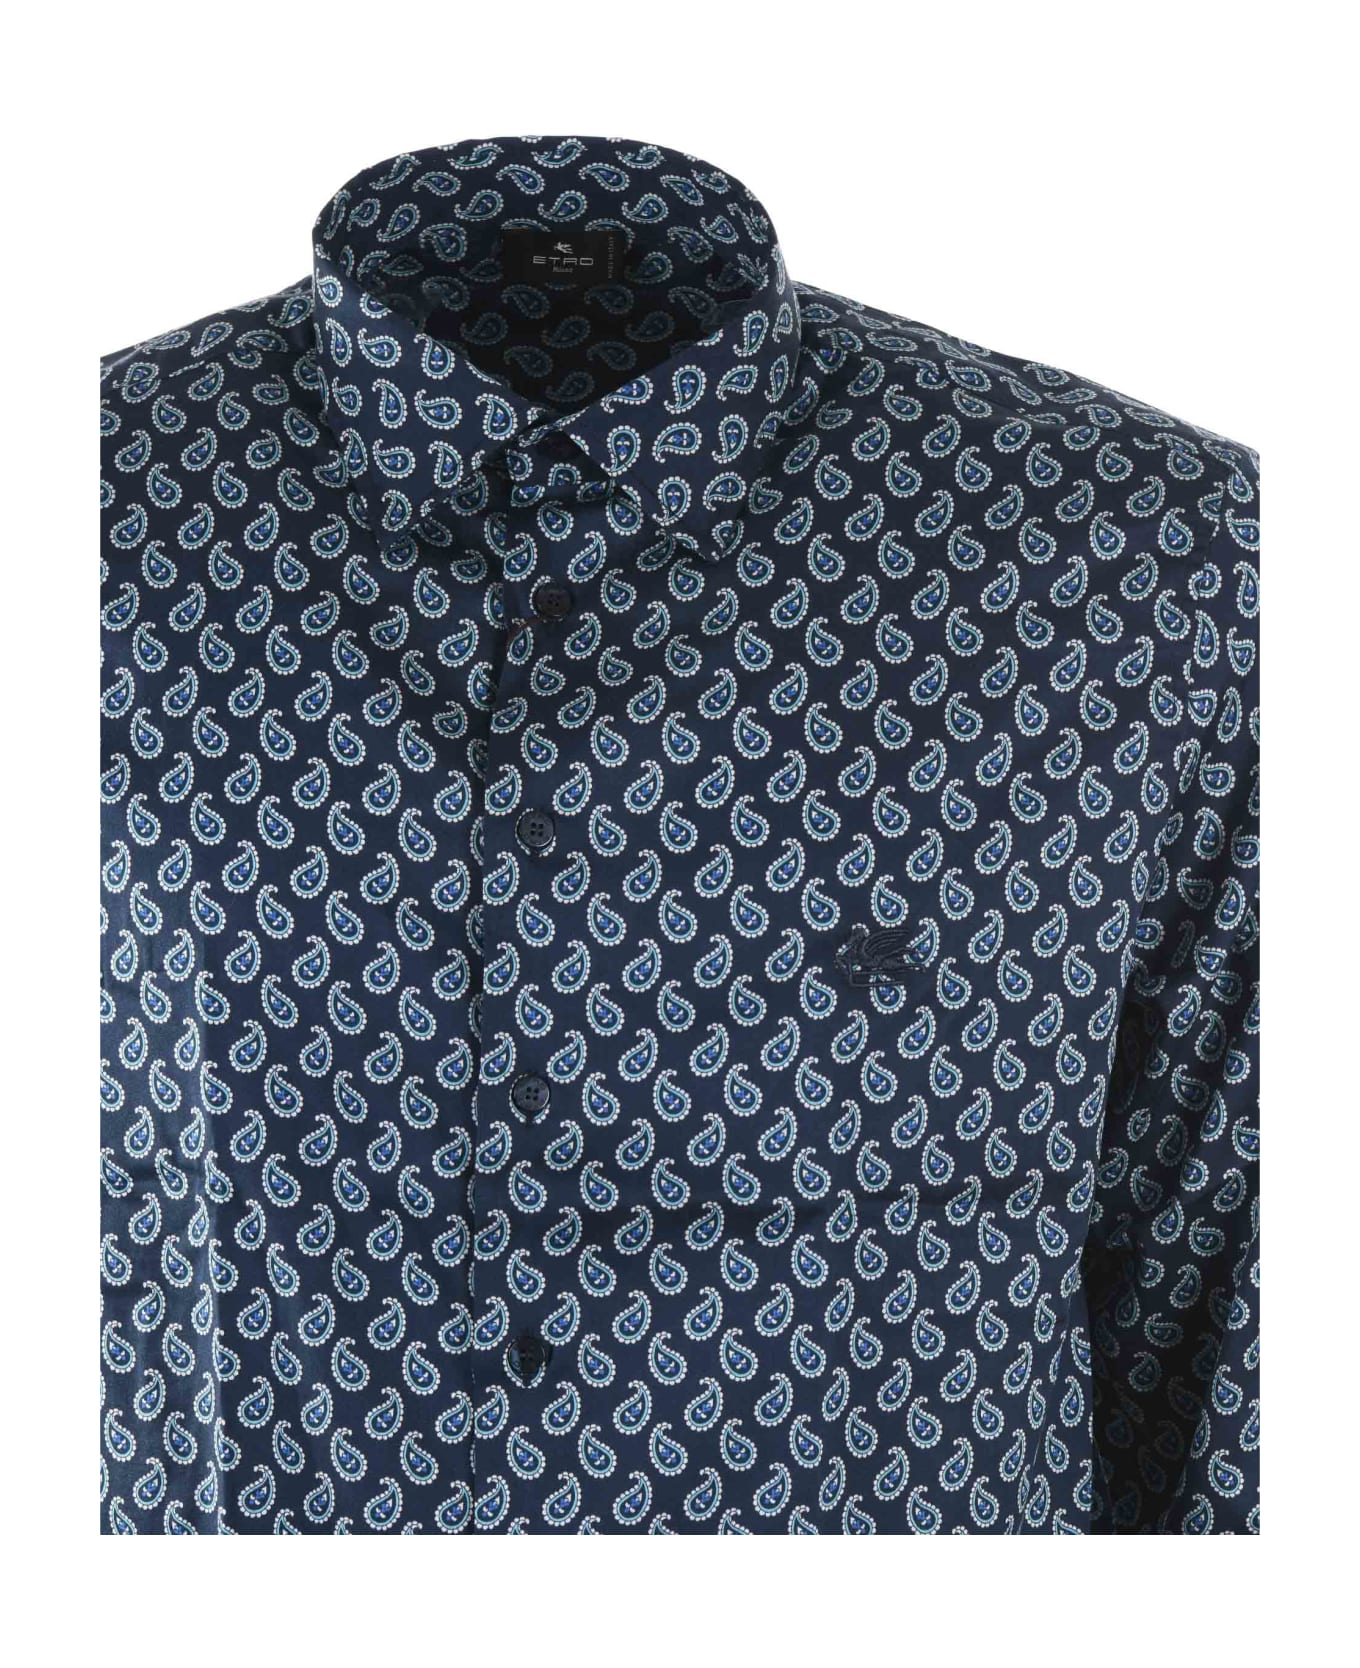 Etro Navy Blue Shirt With Micro Paisley Print - Blue